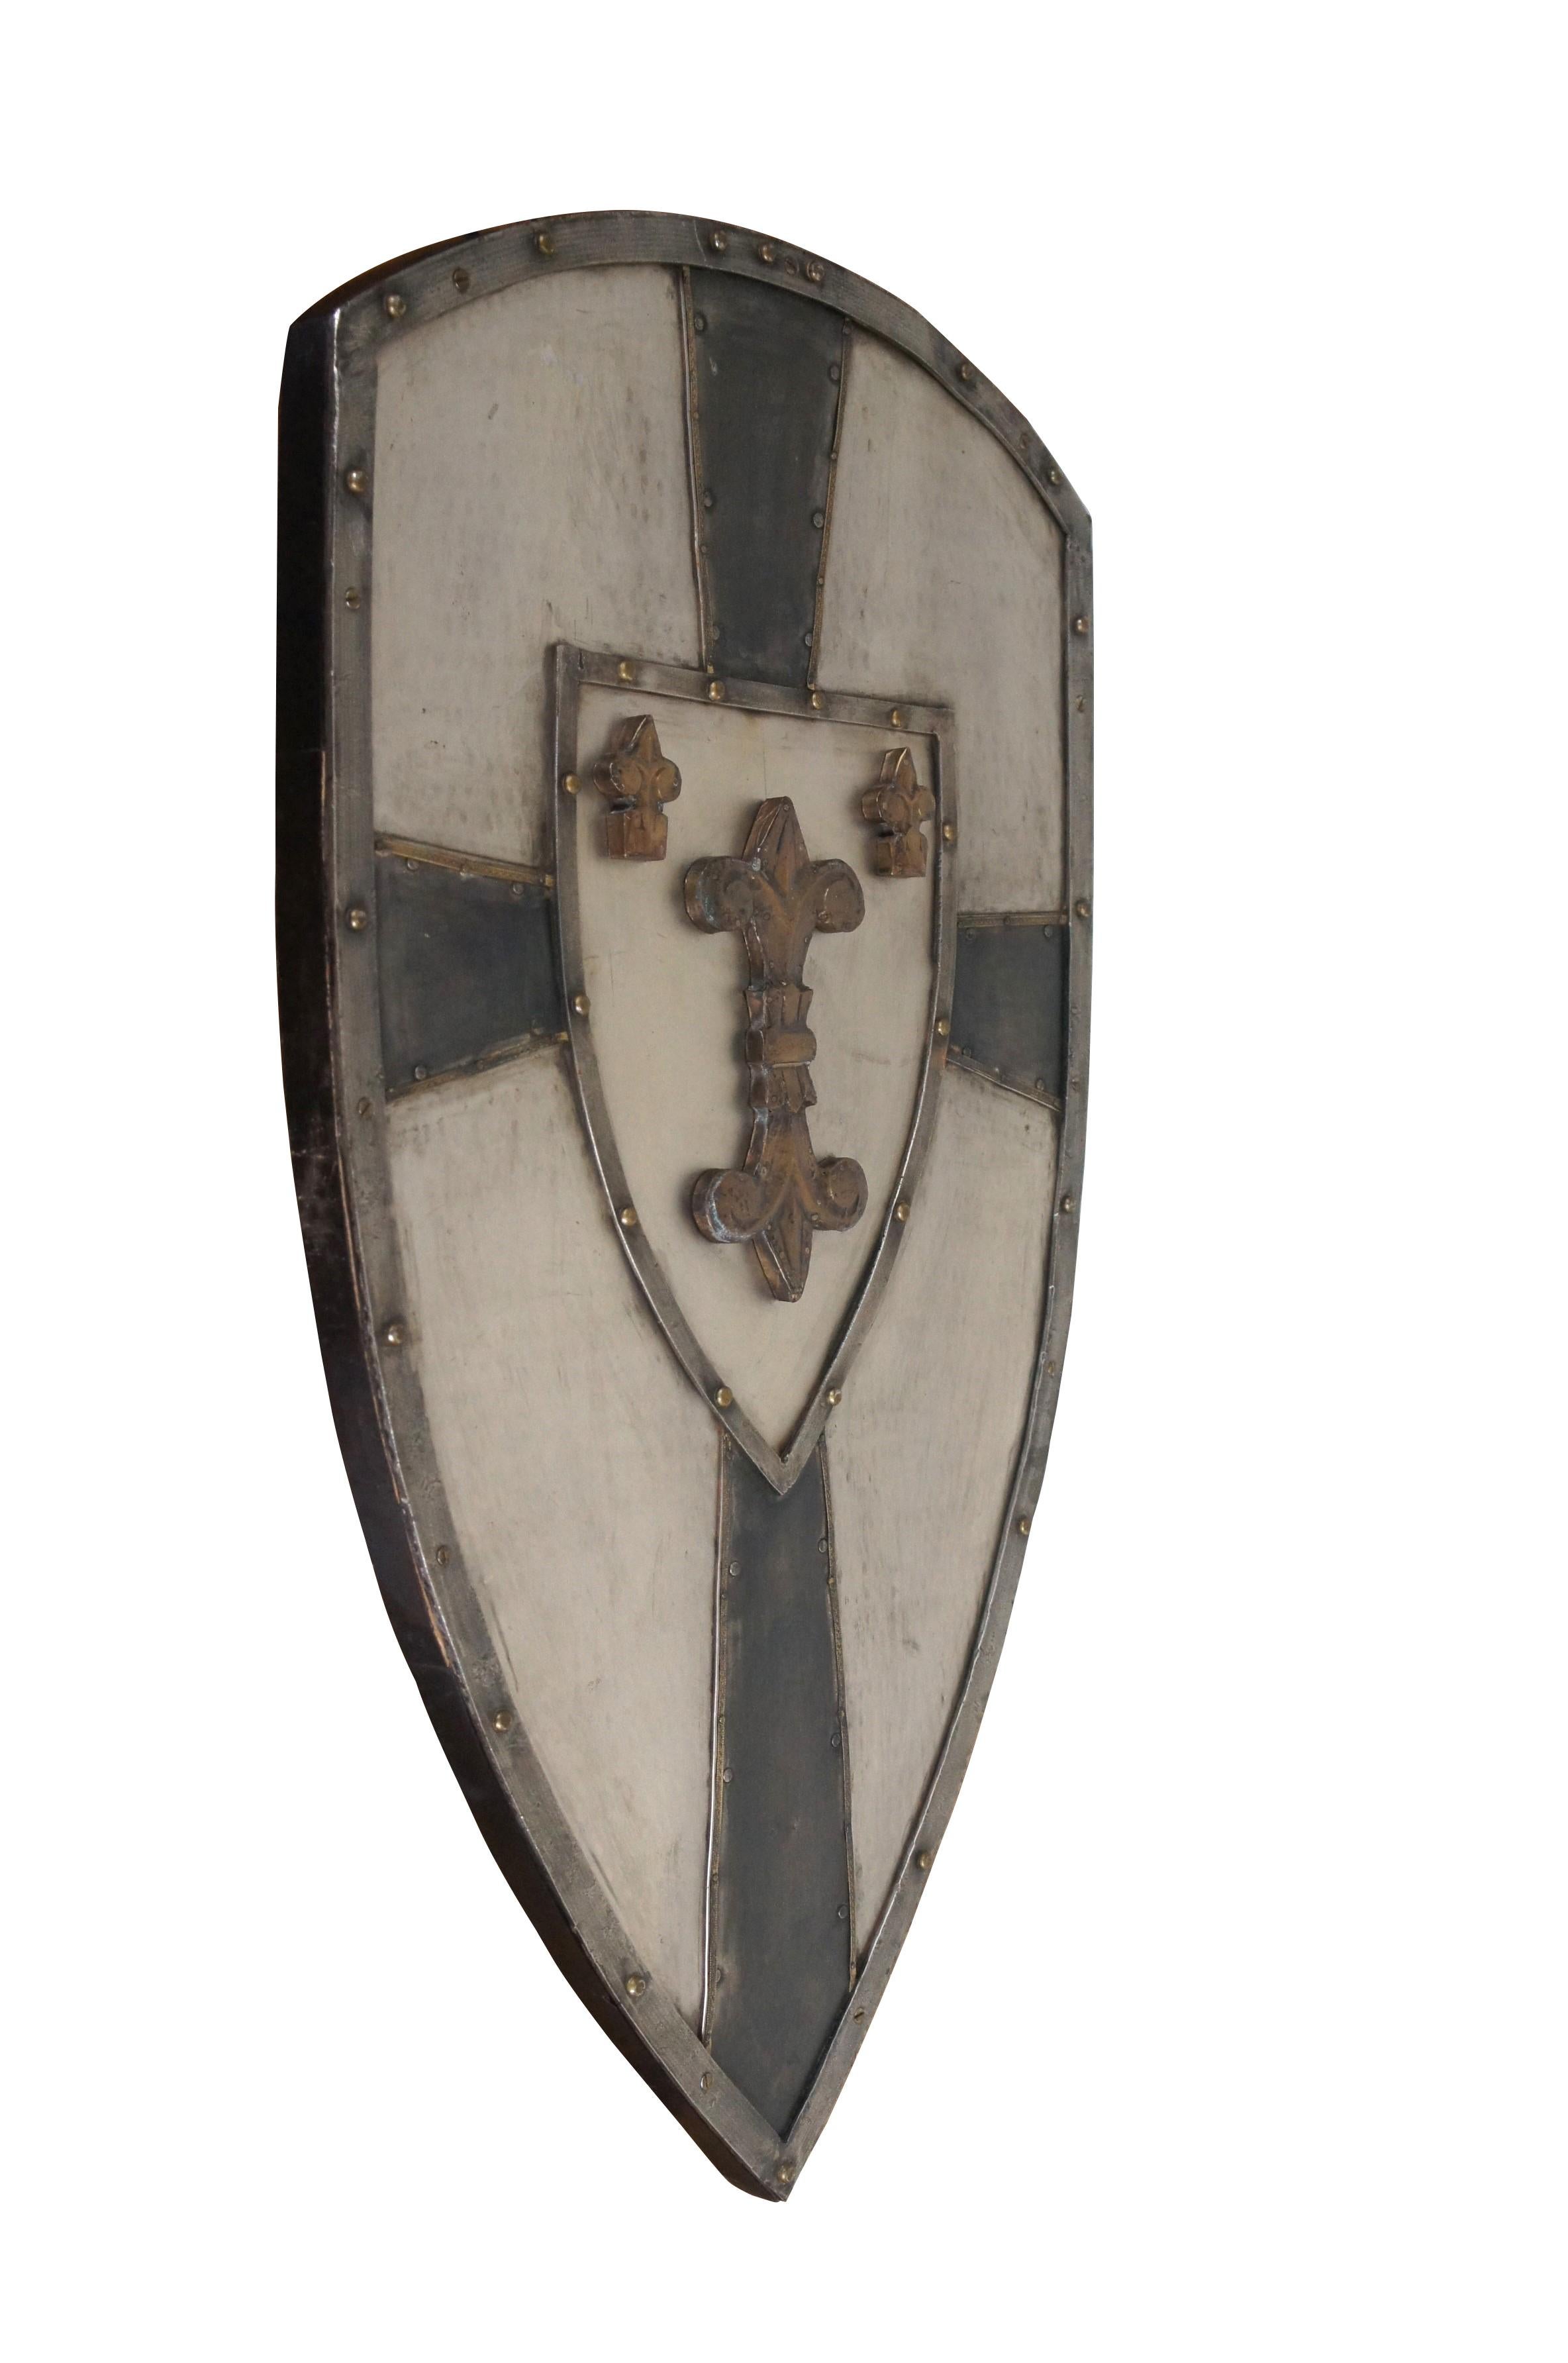 Vintage French Crusader / medieval knight's Heraldic coat of arms shield inspired by the era of Charlemagne. Wooden frame topped with hammered metal, divided with a black crusader's cross around a central motif of a large mirrored fleur de lis